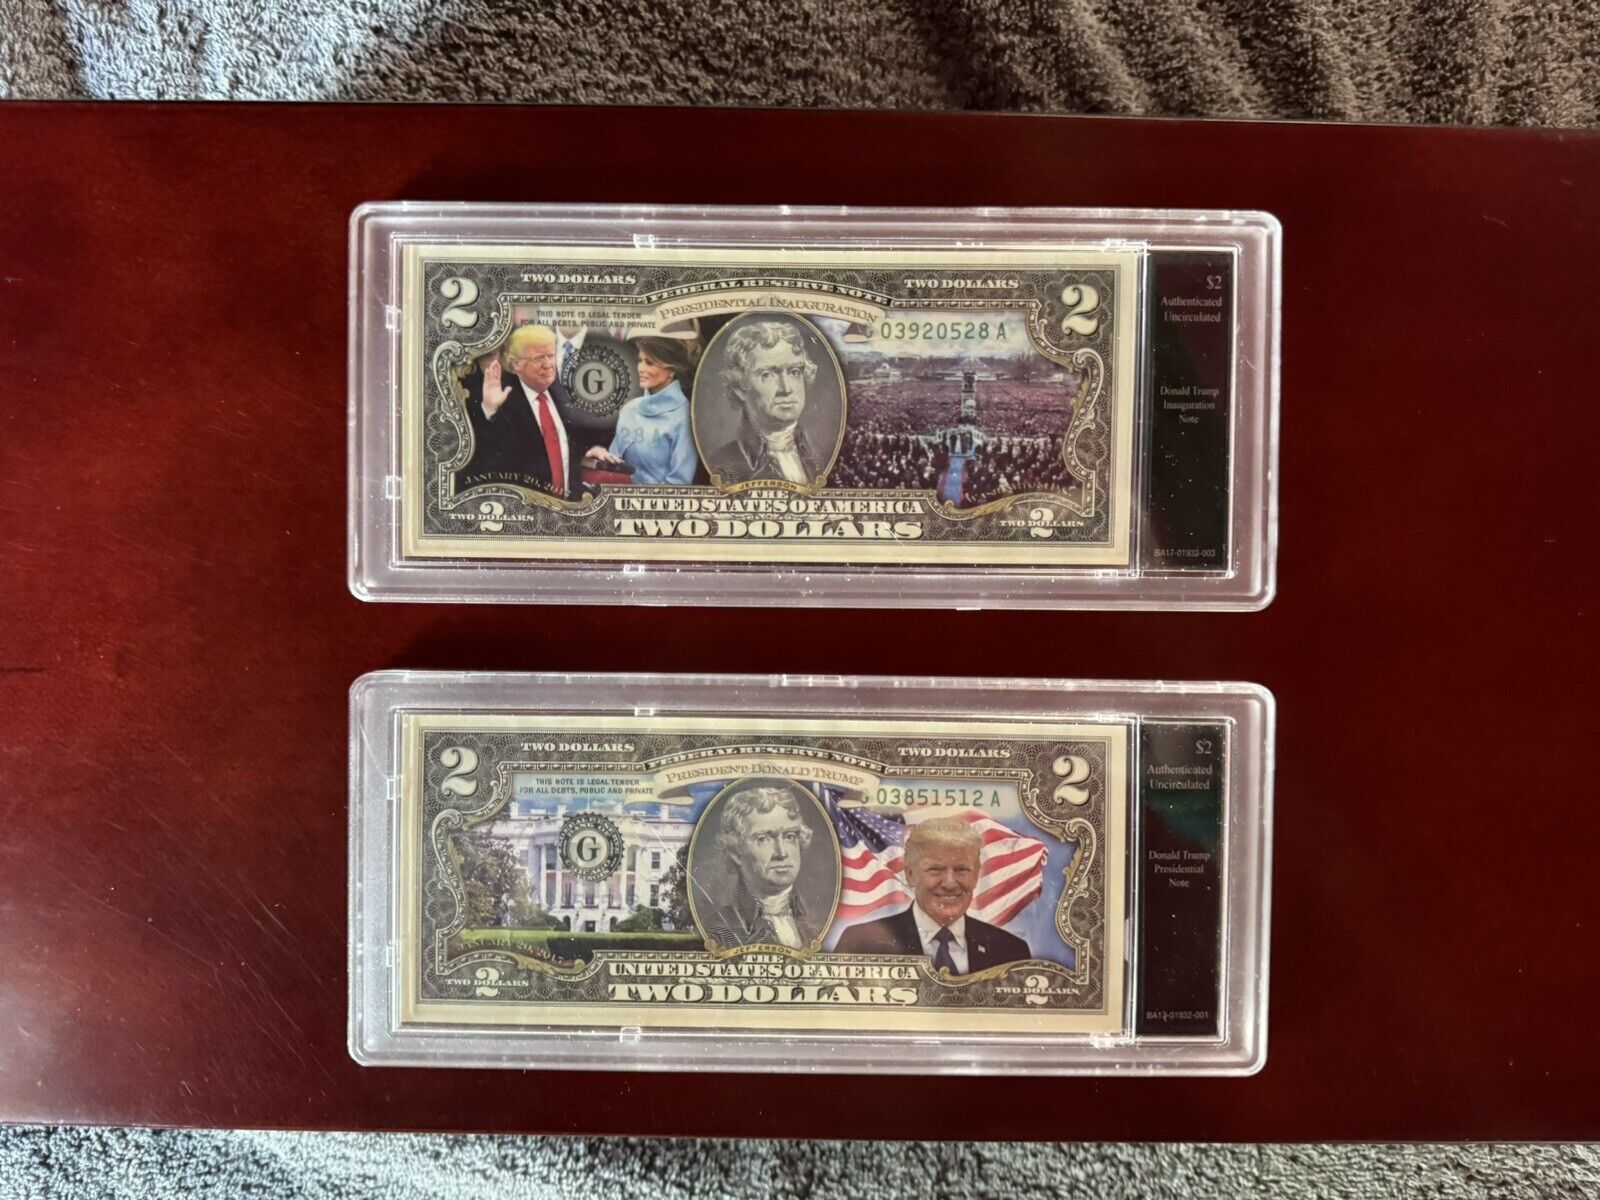 Bradford Exchange Mint  Donald Trump Presidential $2 Bill (2 Total) with case.